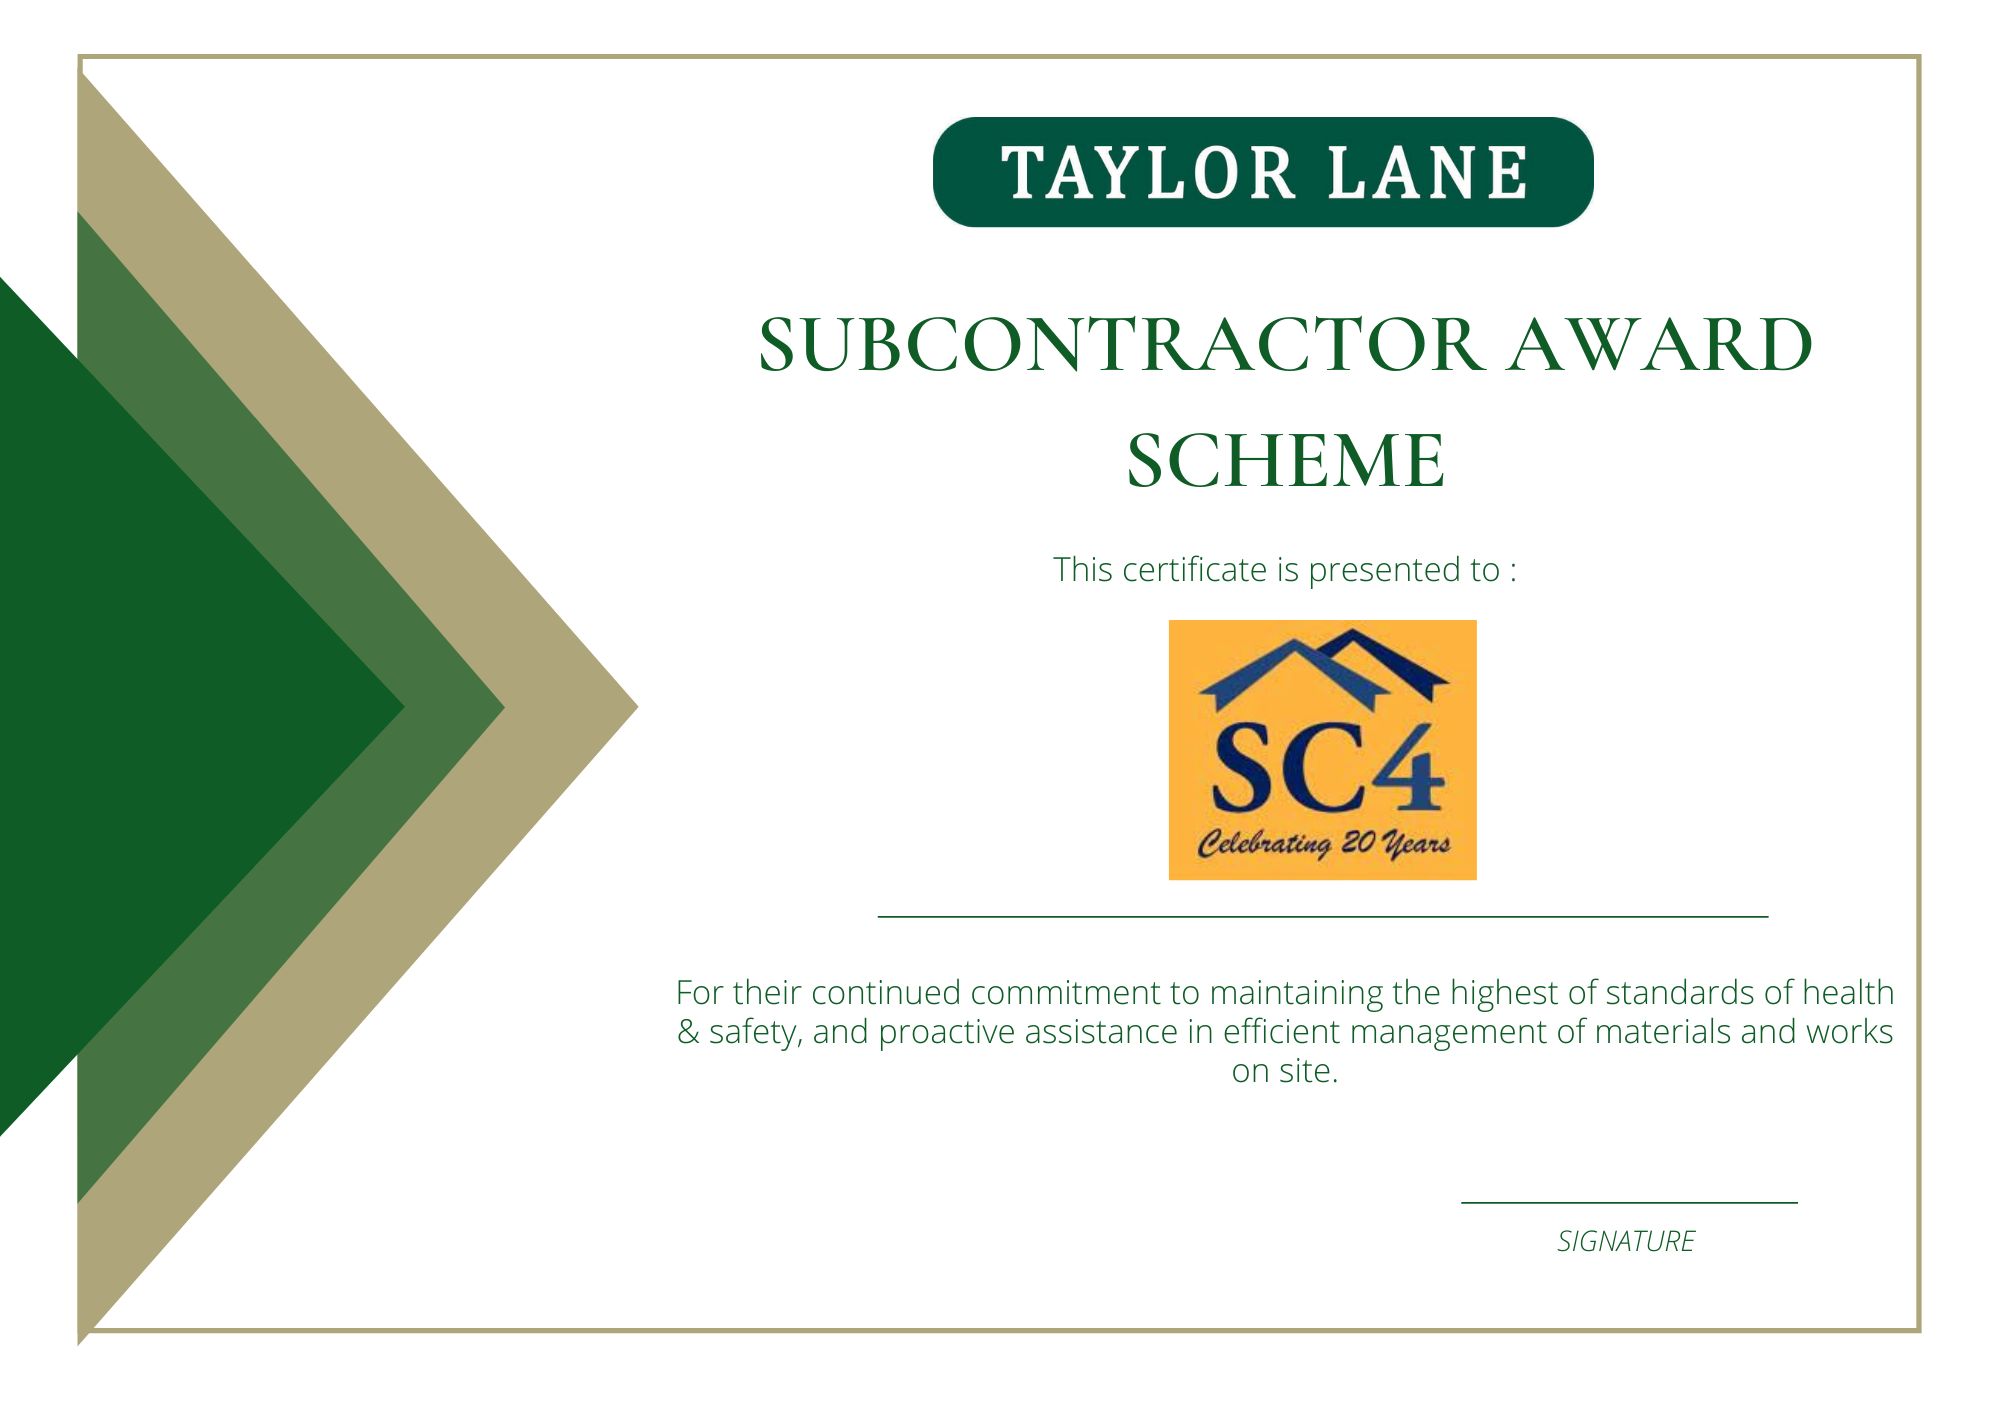 SC4 named first winners of Taylor Lane Timber Frame Ltd's Subcontractor Award